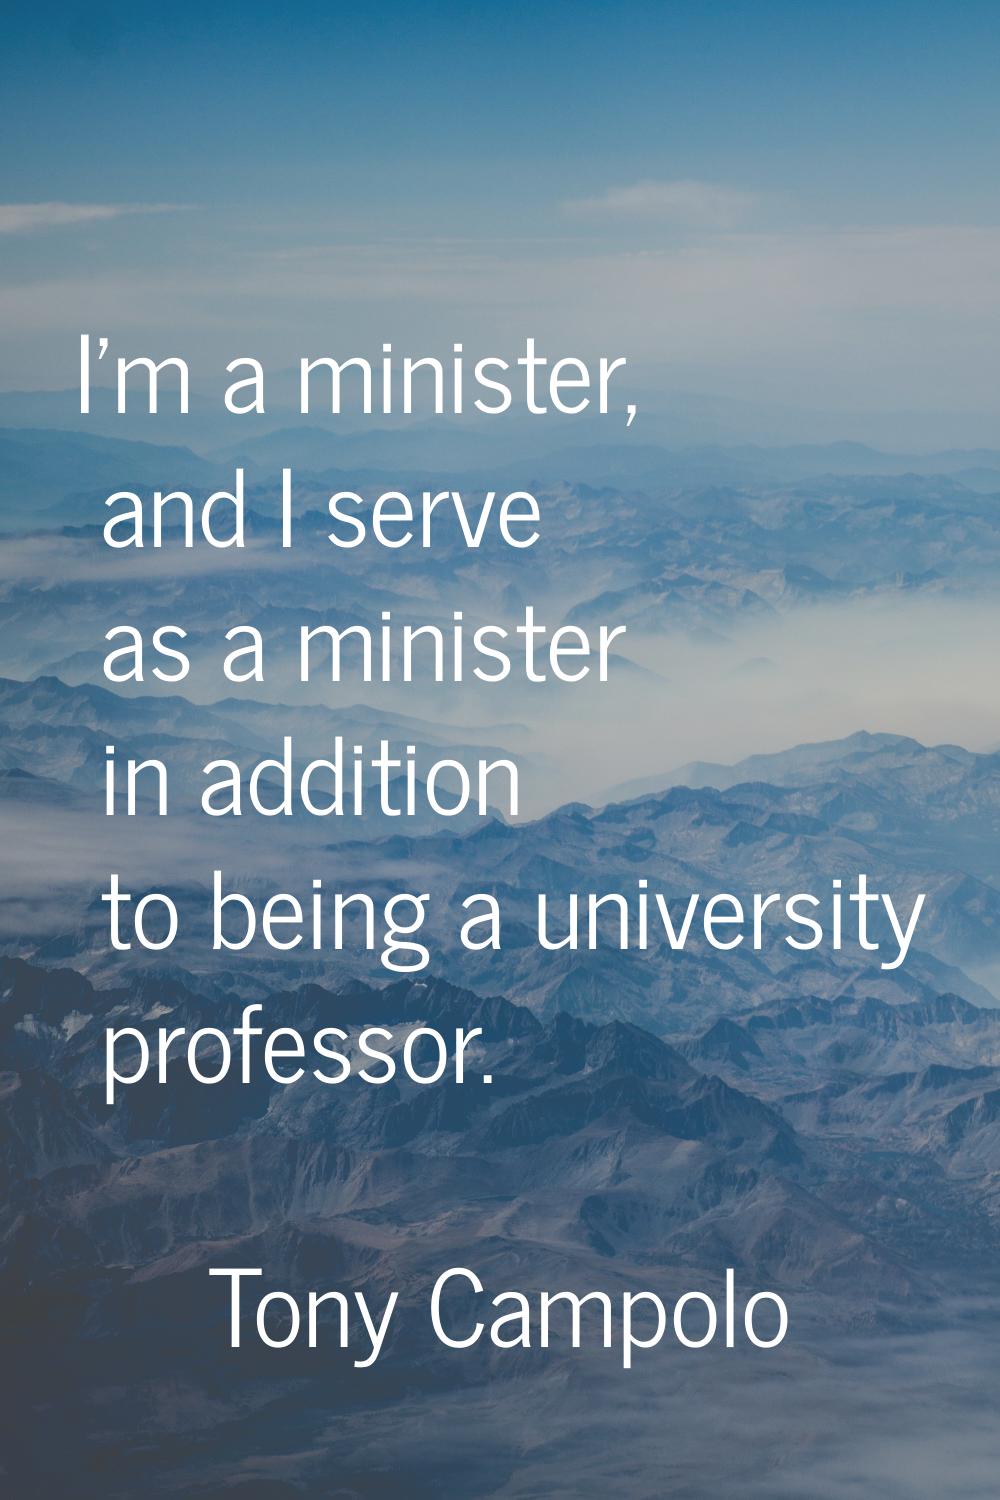 I'm a minister, and I serve as a minister in addition to being a university professor.